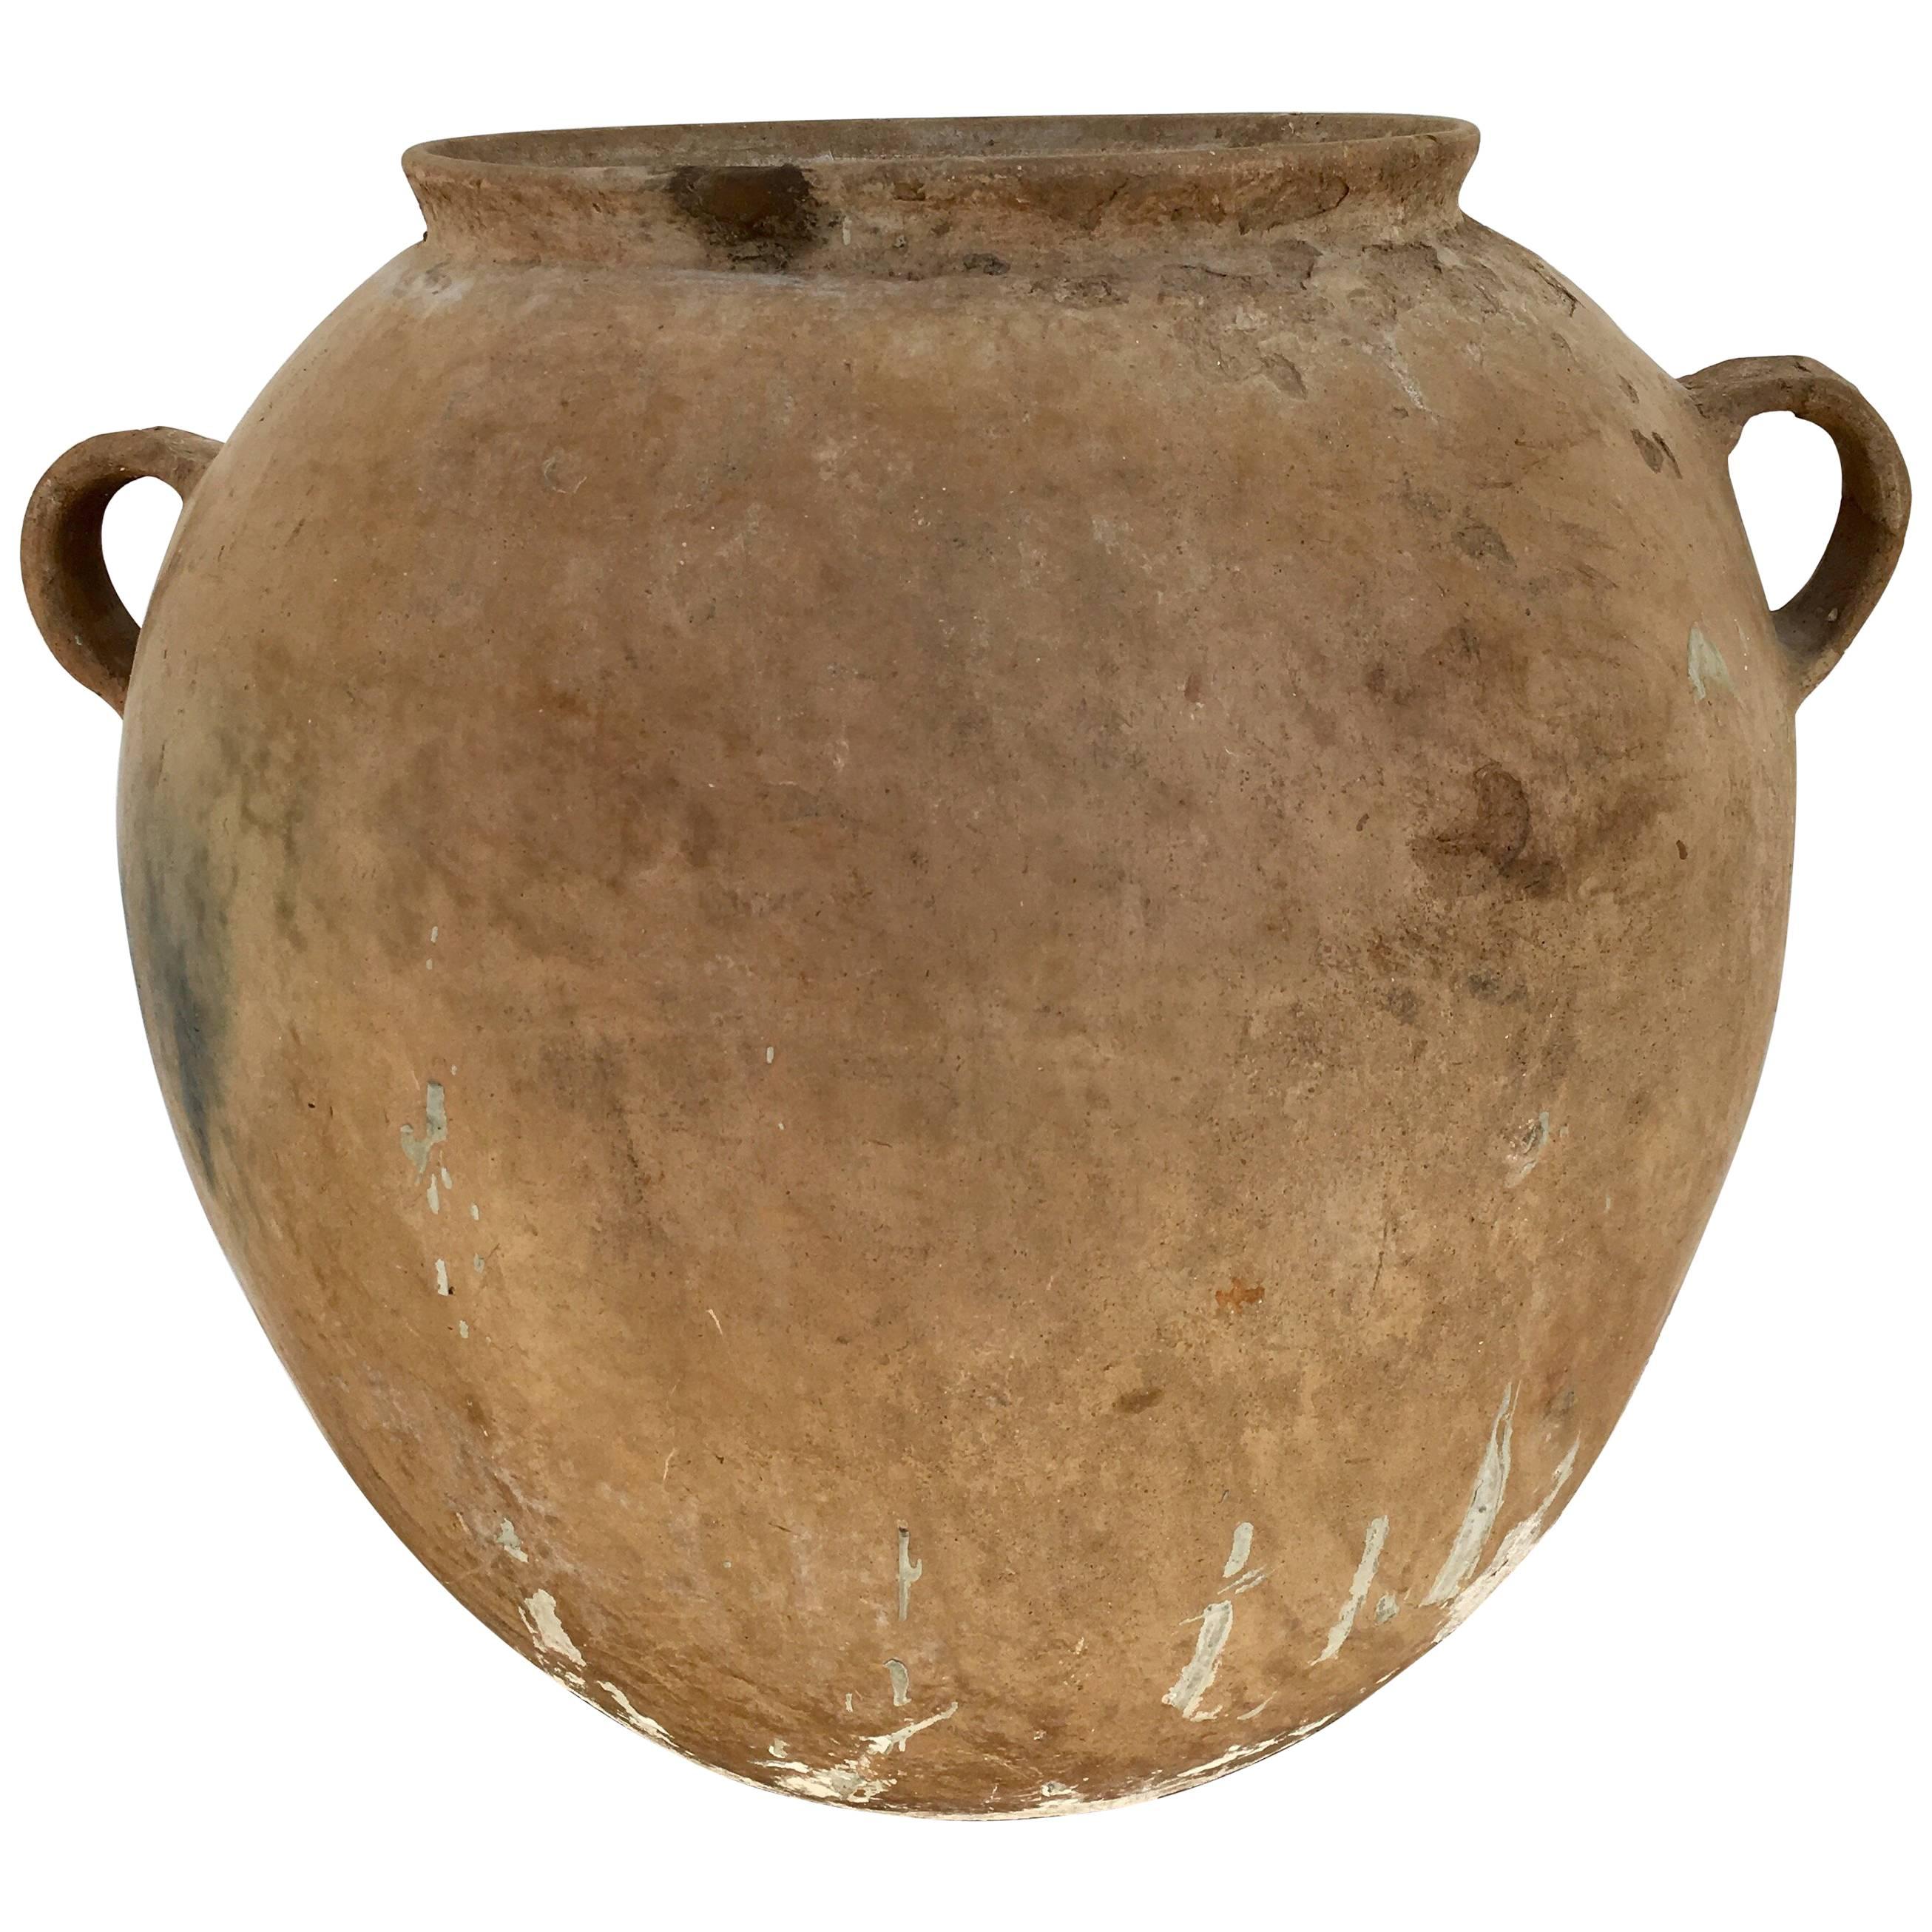 Terracotta Pot from Central Mexico